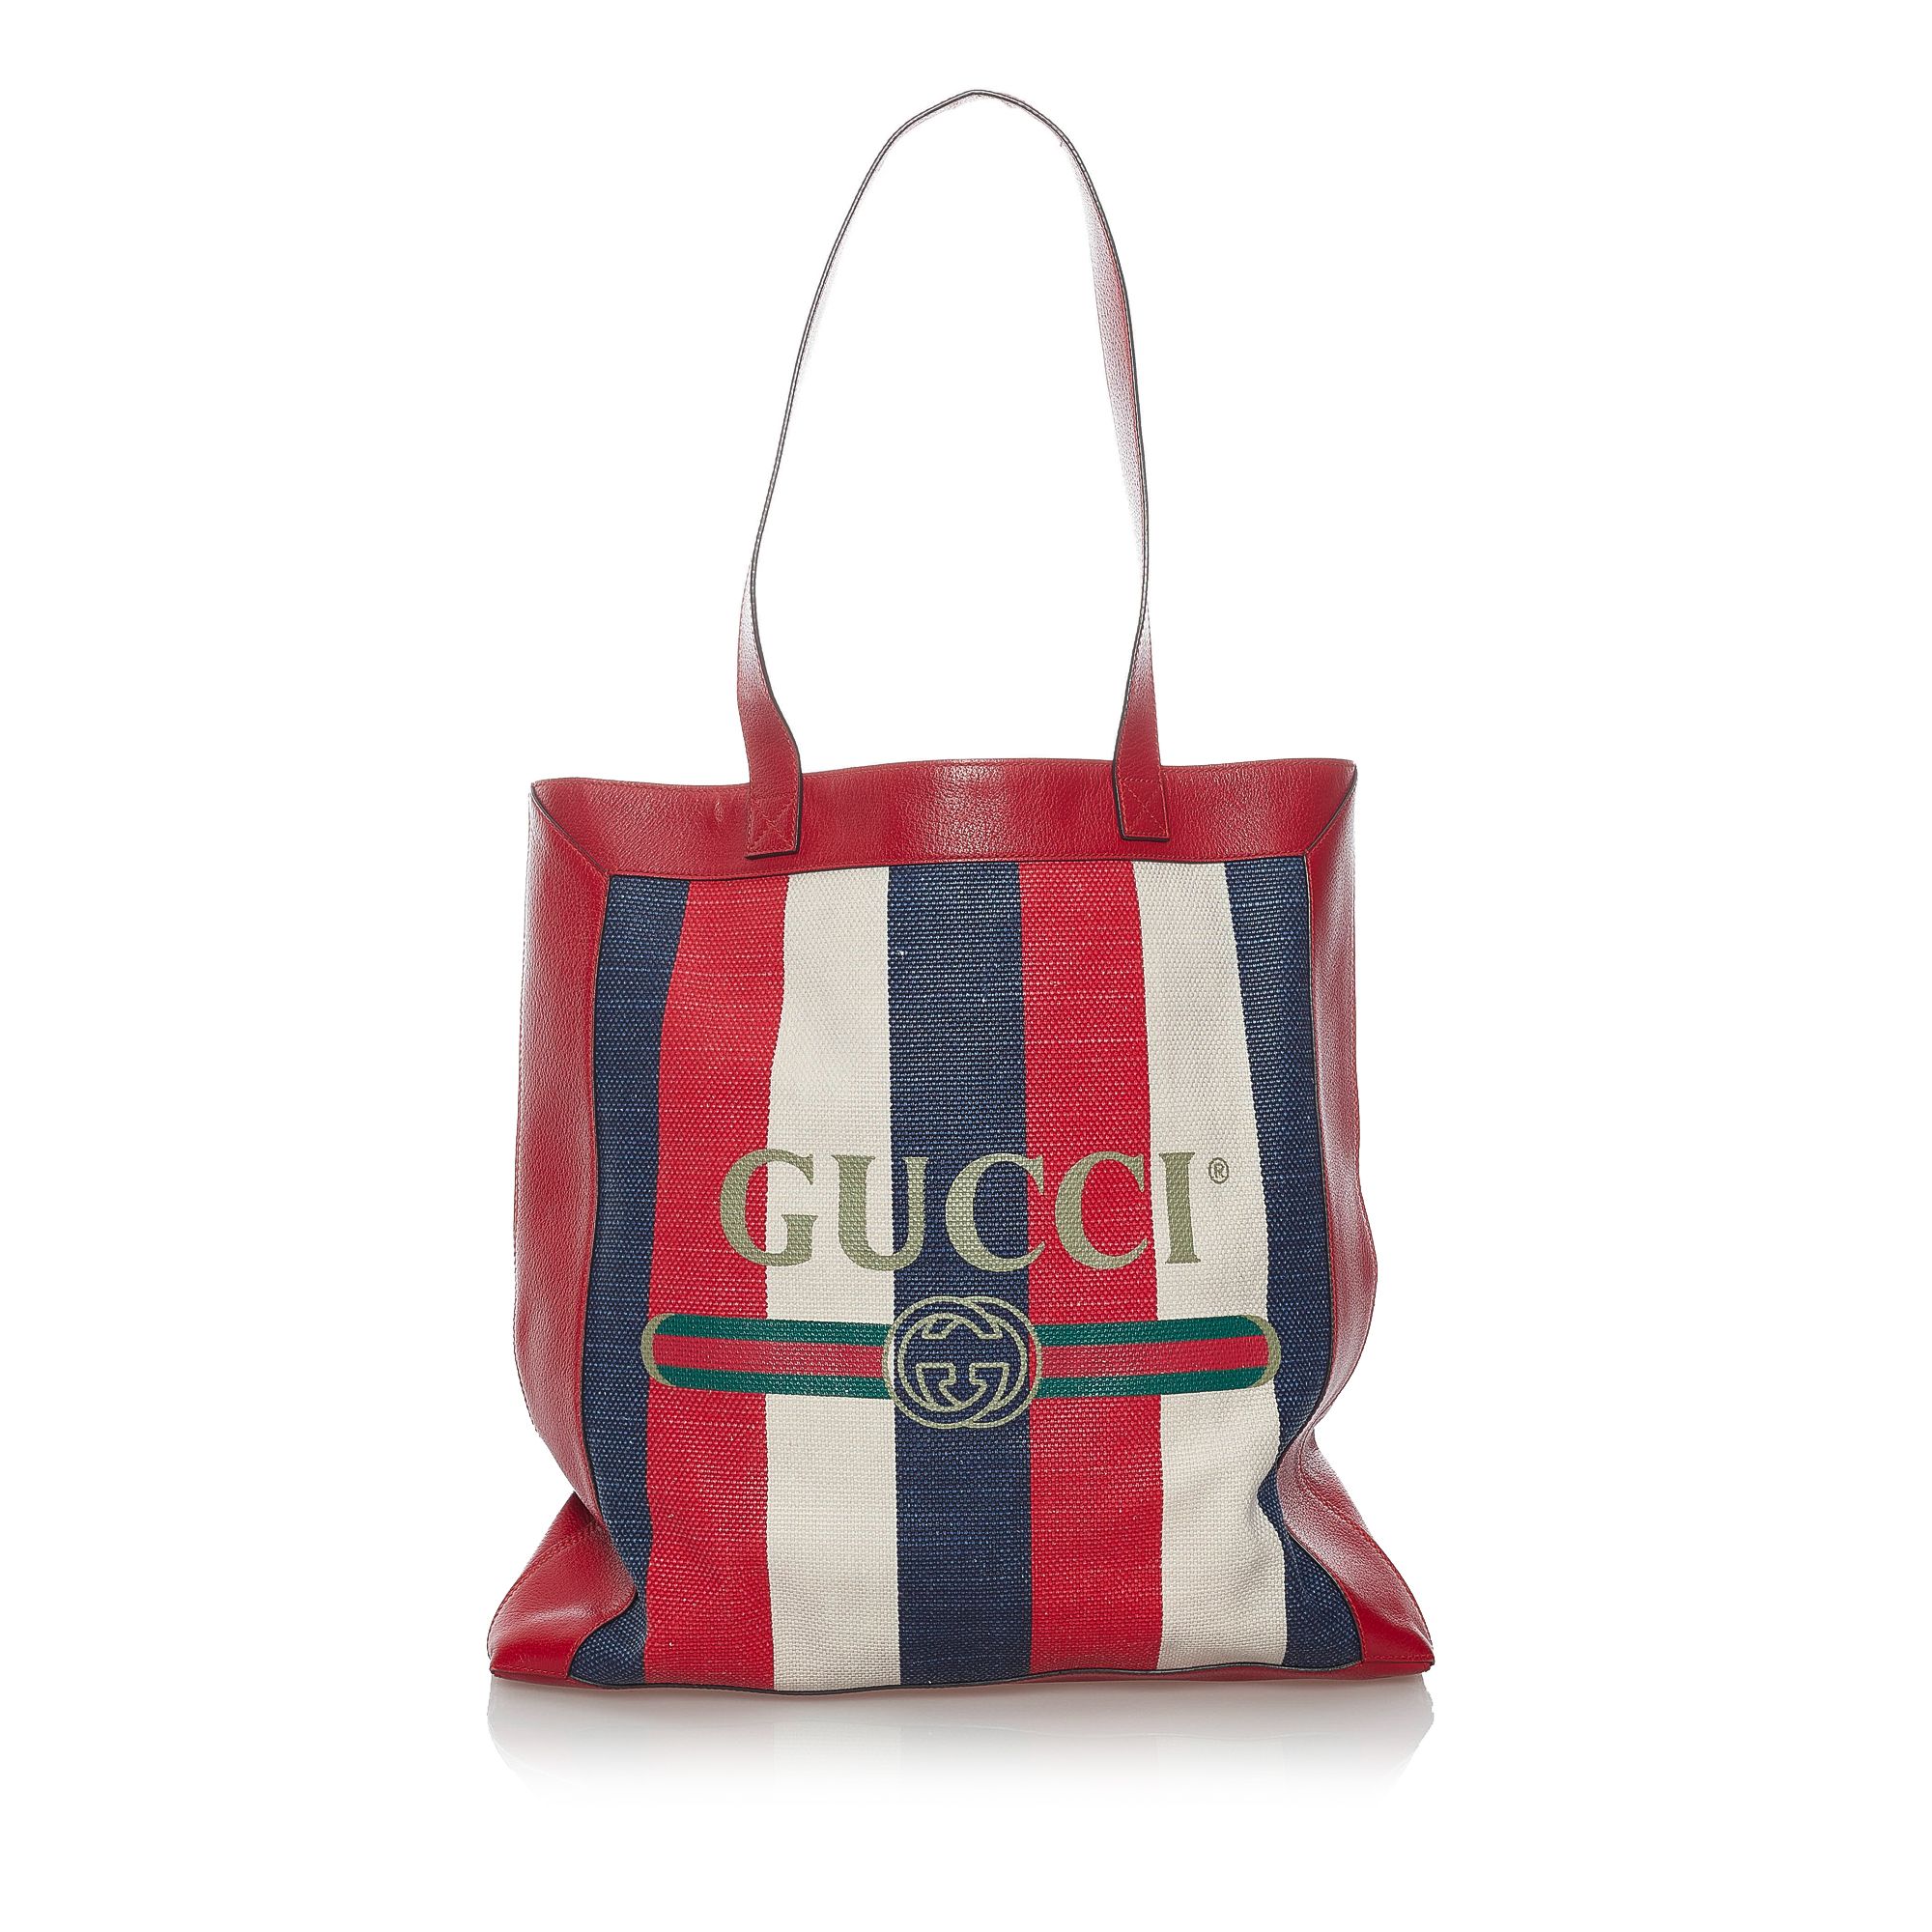 VINTAGE. RRP AS NEW. The 2018 Logo Striped tote bag features a printed canvas body with leather trim, a flat leather straps, an open top, and an interior zip pocket.Exterior back is discolored, out of shape and scratched. Exterior bottom is out of shape. Exterior corners is scratched. Exterior front is discolored, out of shape, scratched and stained. Zipper is scratched and tarnished. Interior lining is discolored.

Dimensions:
Length 43cm
Width 40cm
Depth 7cm
Hand Drop 29cm
Shoulder Drop 29cm

Original Accessories: Dust Bag

Serial Number: 523781
Color: Red x Multi
Material: Fabric x Canvas x Leather x Calf
Country of Origin: Italy
Boutique Reference: SSU156728K1342


Product Rating: GoodCondition

Certificate of Authenticity is available upon request with no extra fee required. Please contact our customer service team.